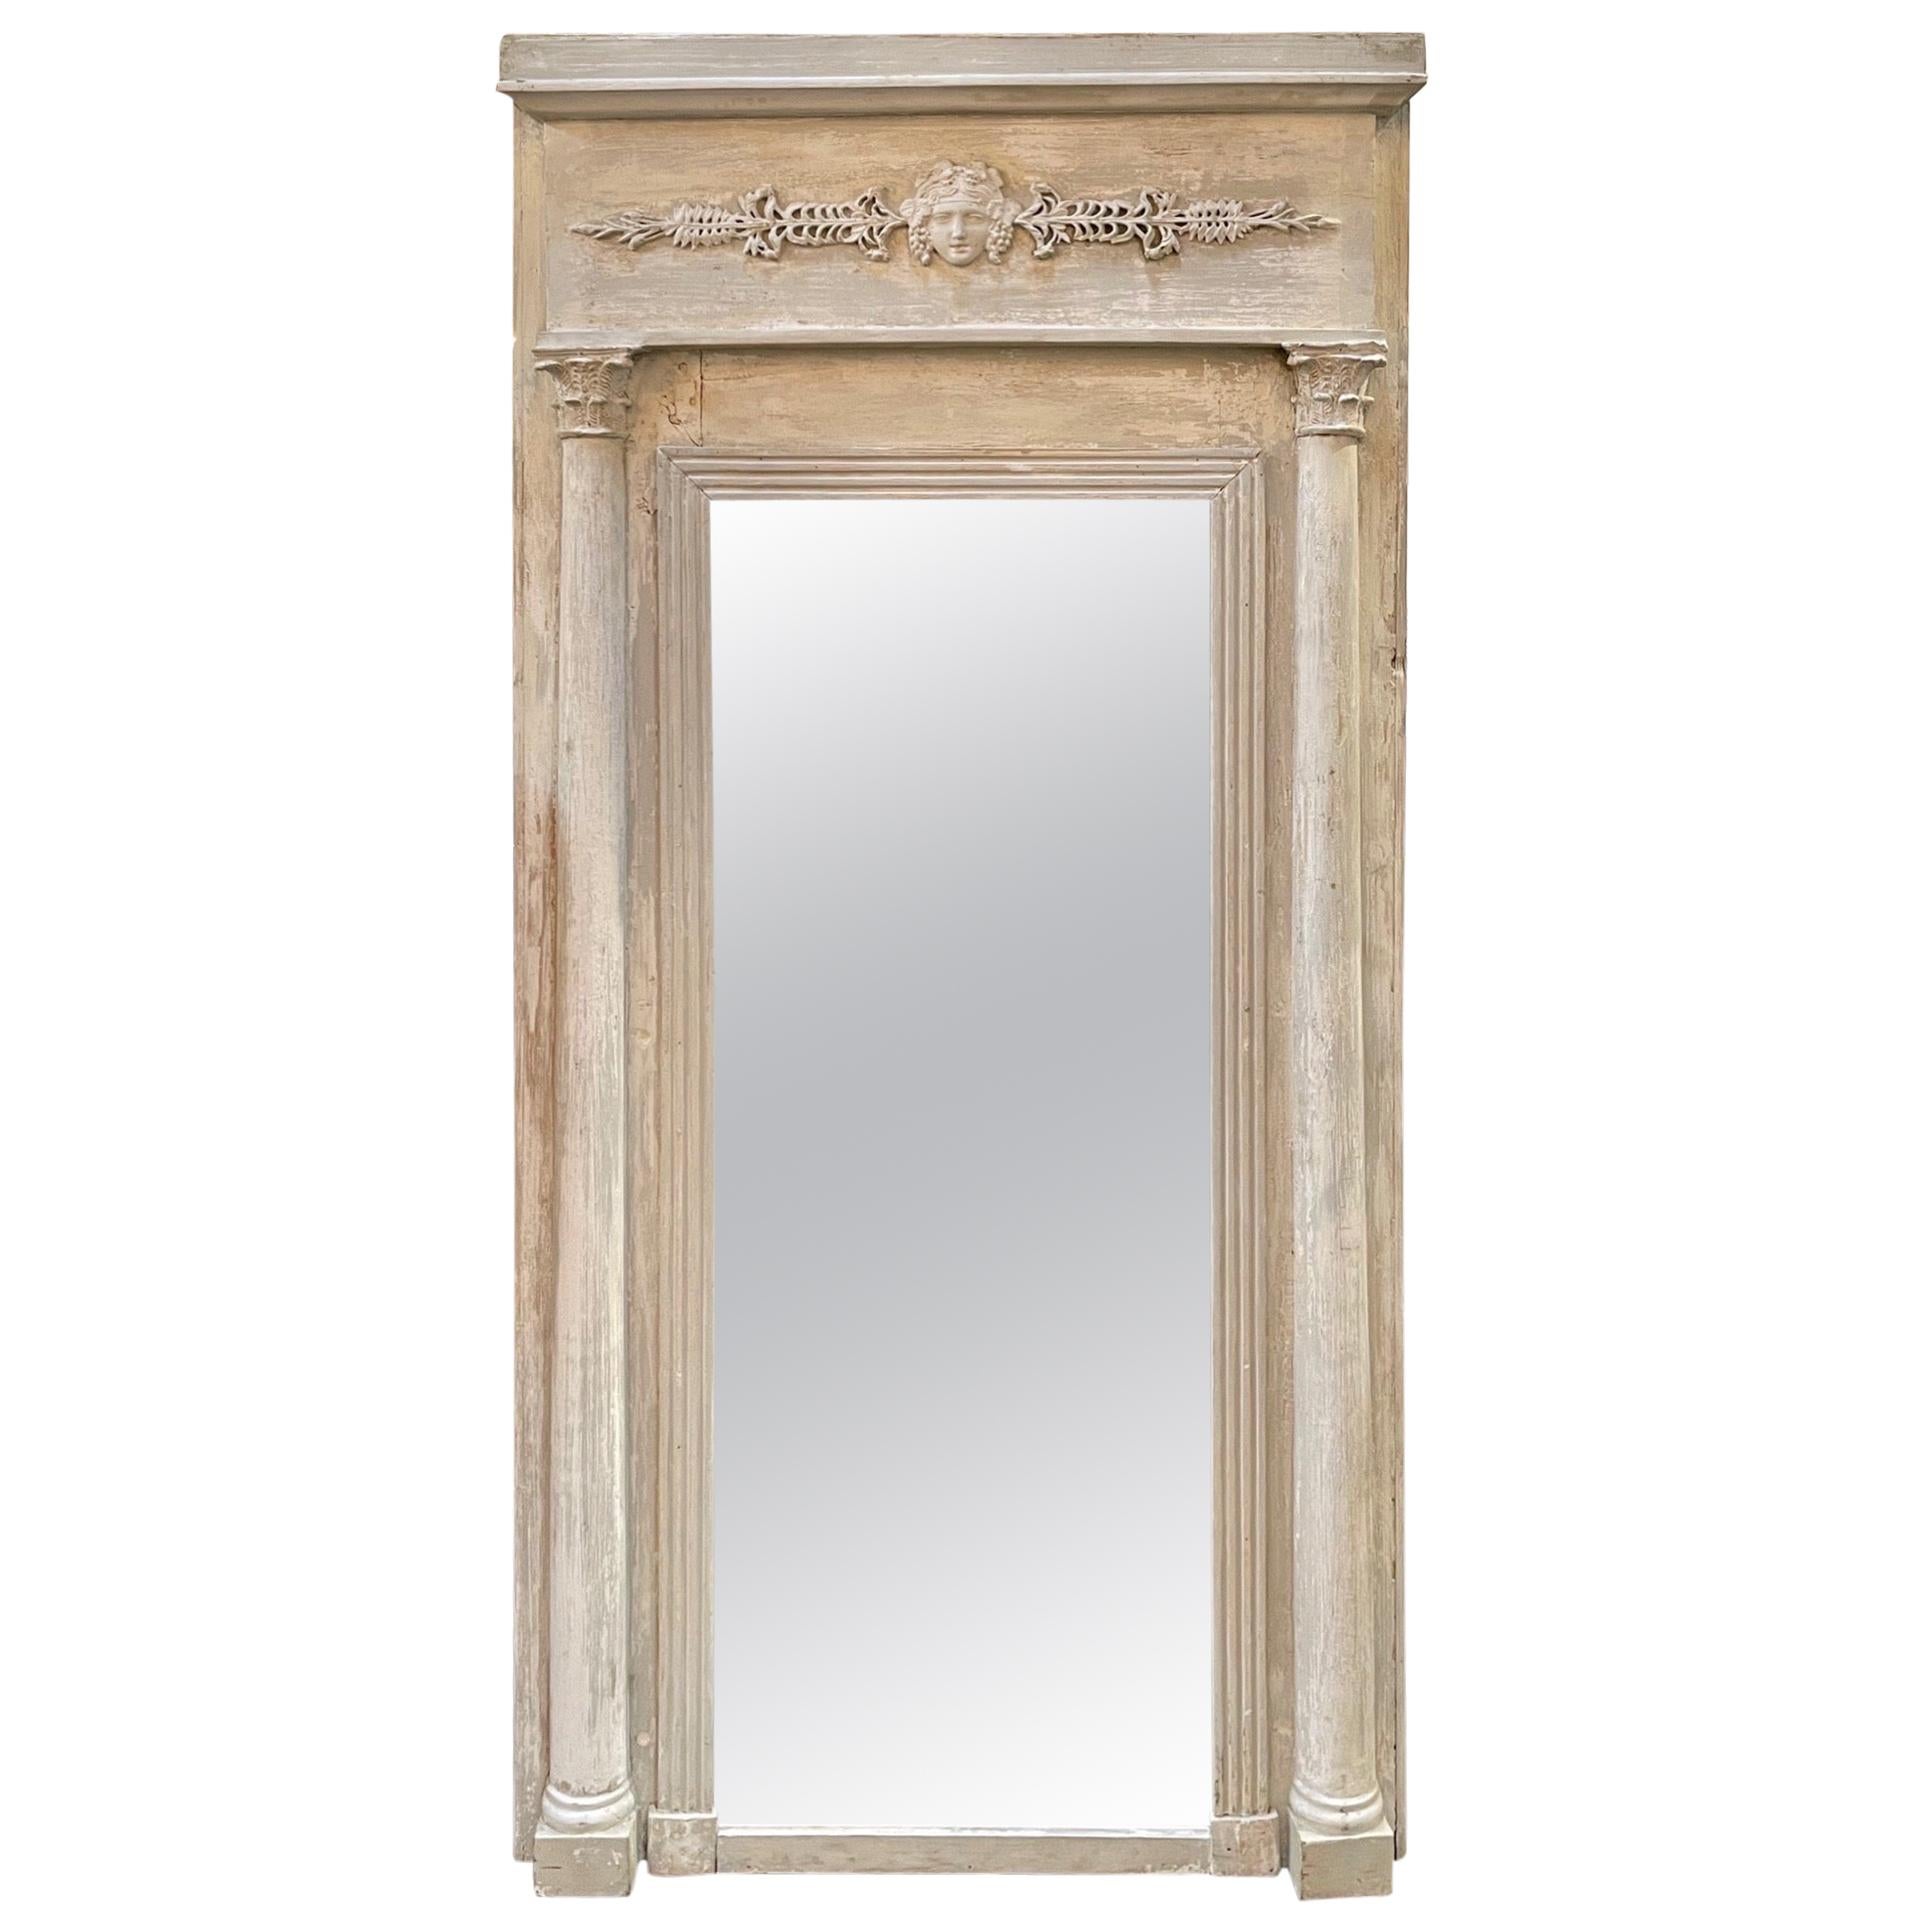 Early 19th Century Swedish Neoclassical Painted Mirror For Sale